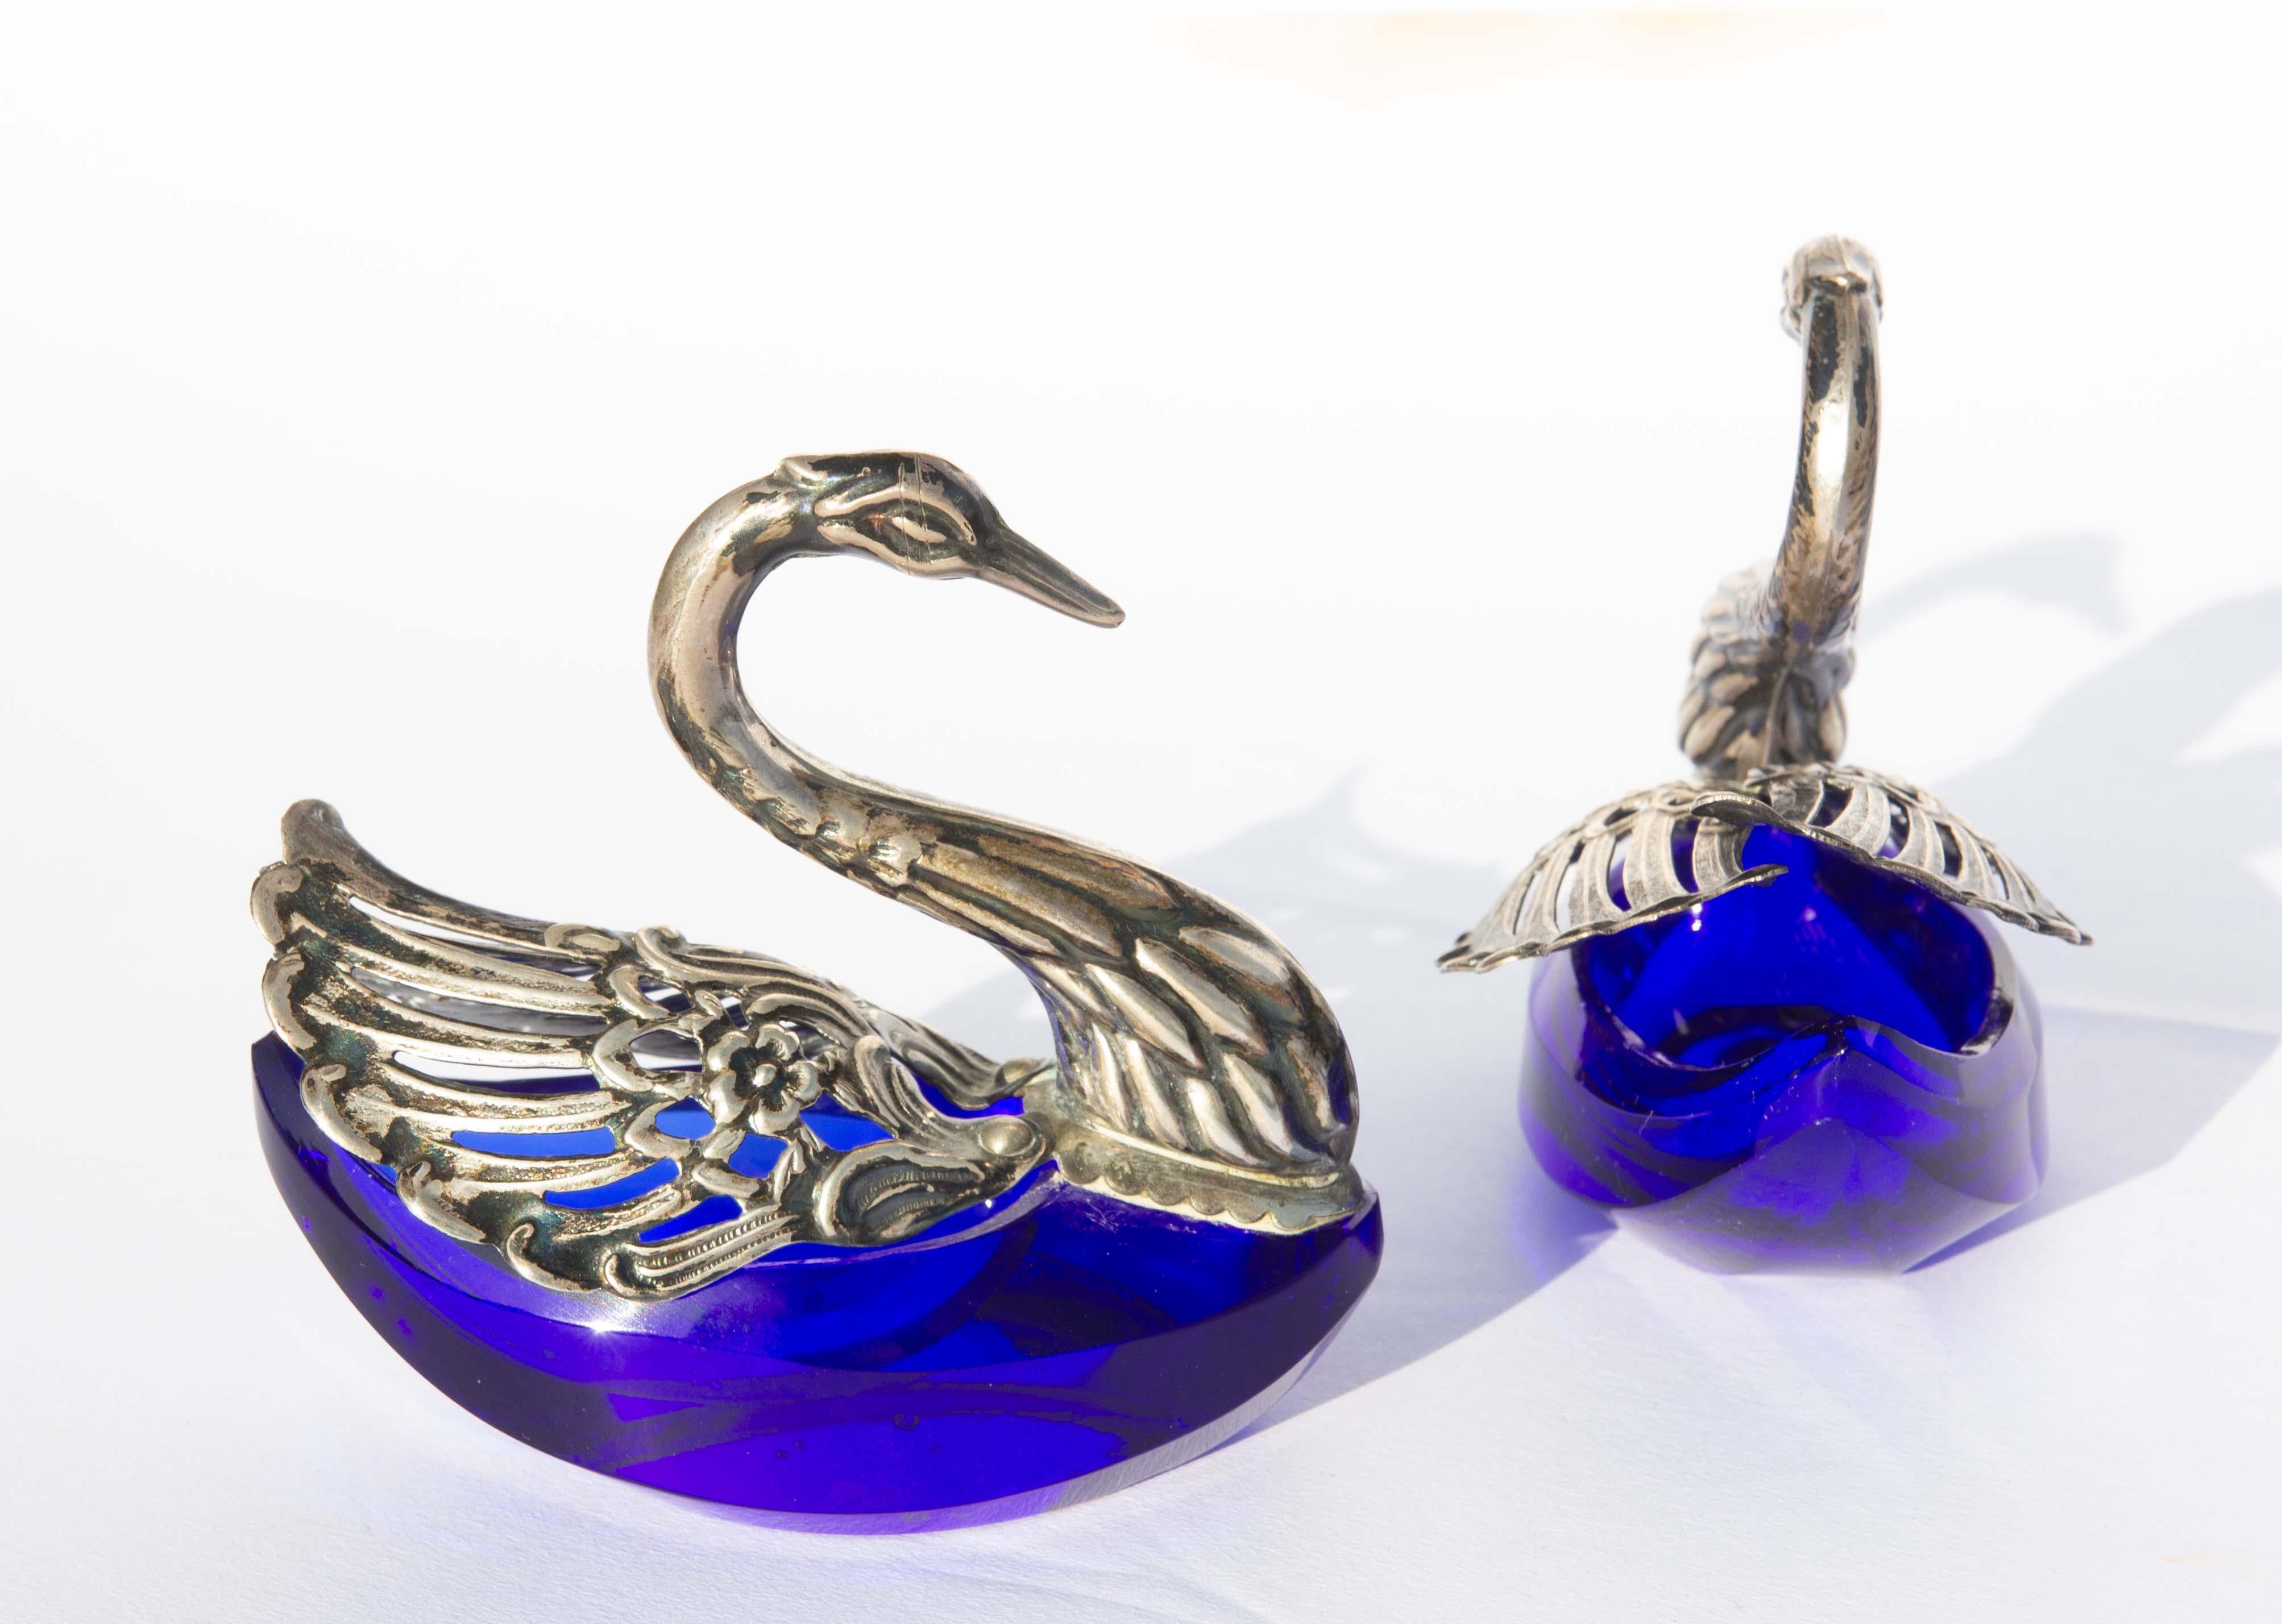 Pair of silver and cobalt blue glass salts. Good quality ground and polished crystal glass. Wings are adjustable, mid-20th century.